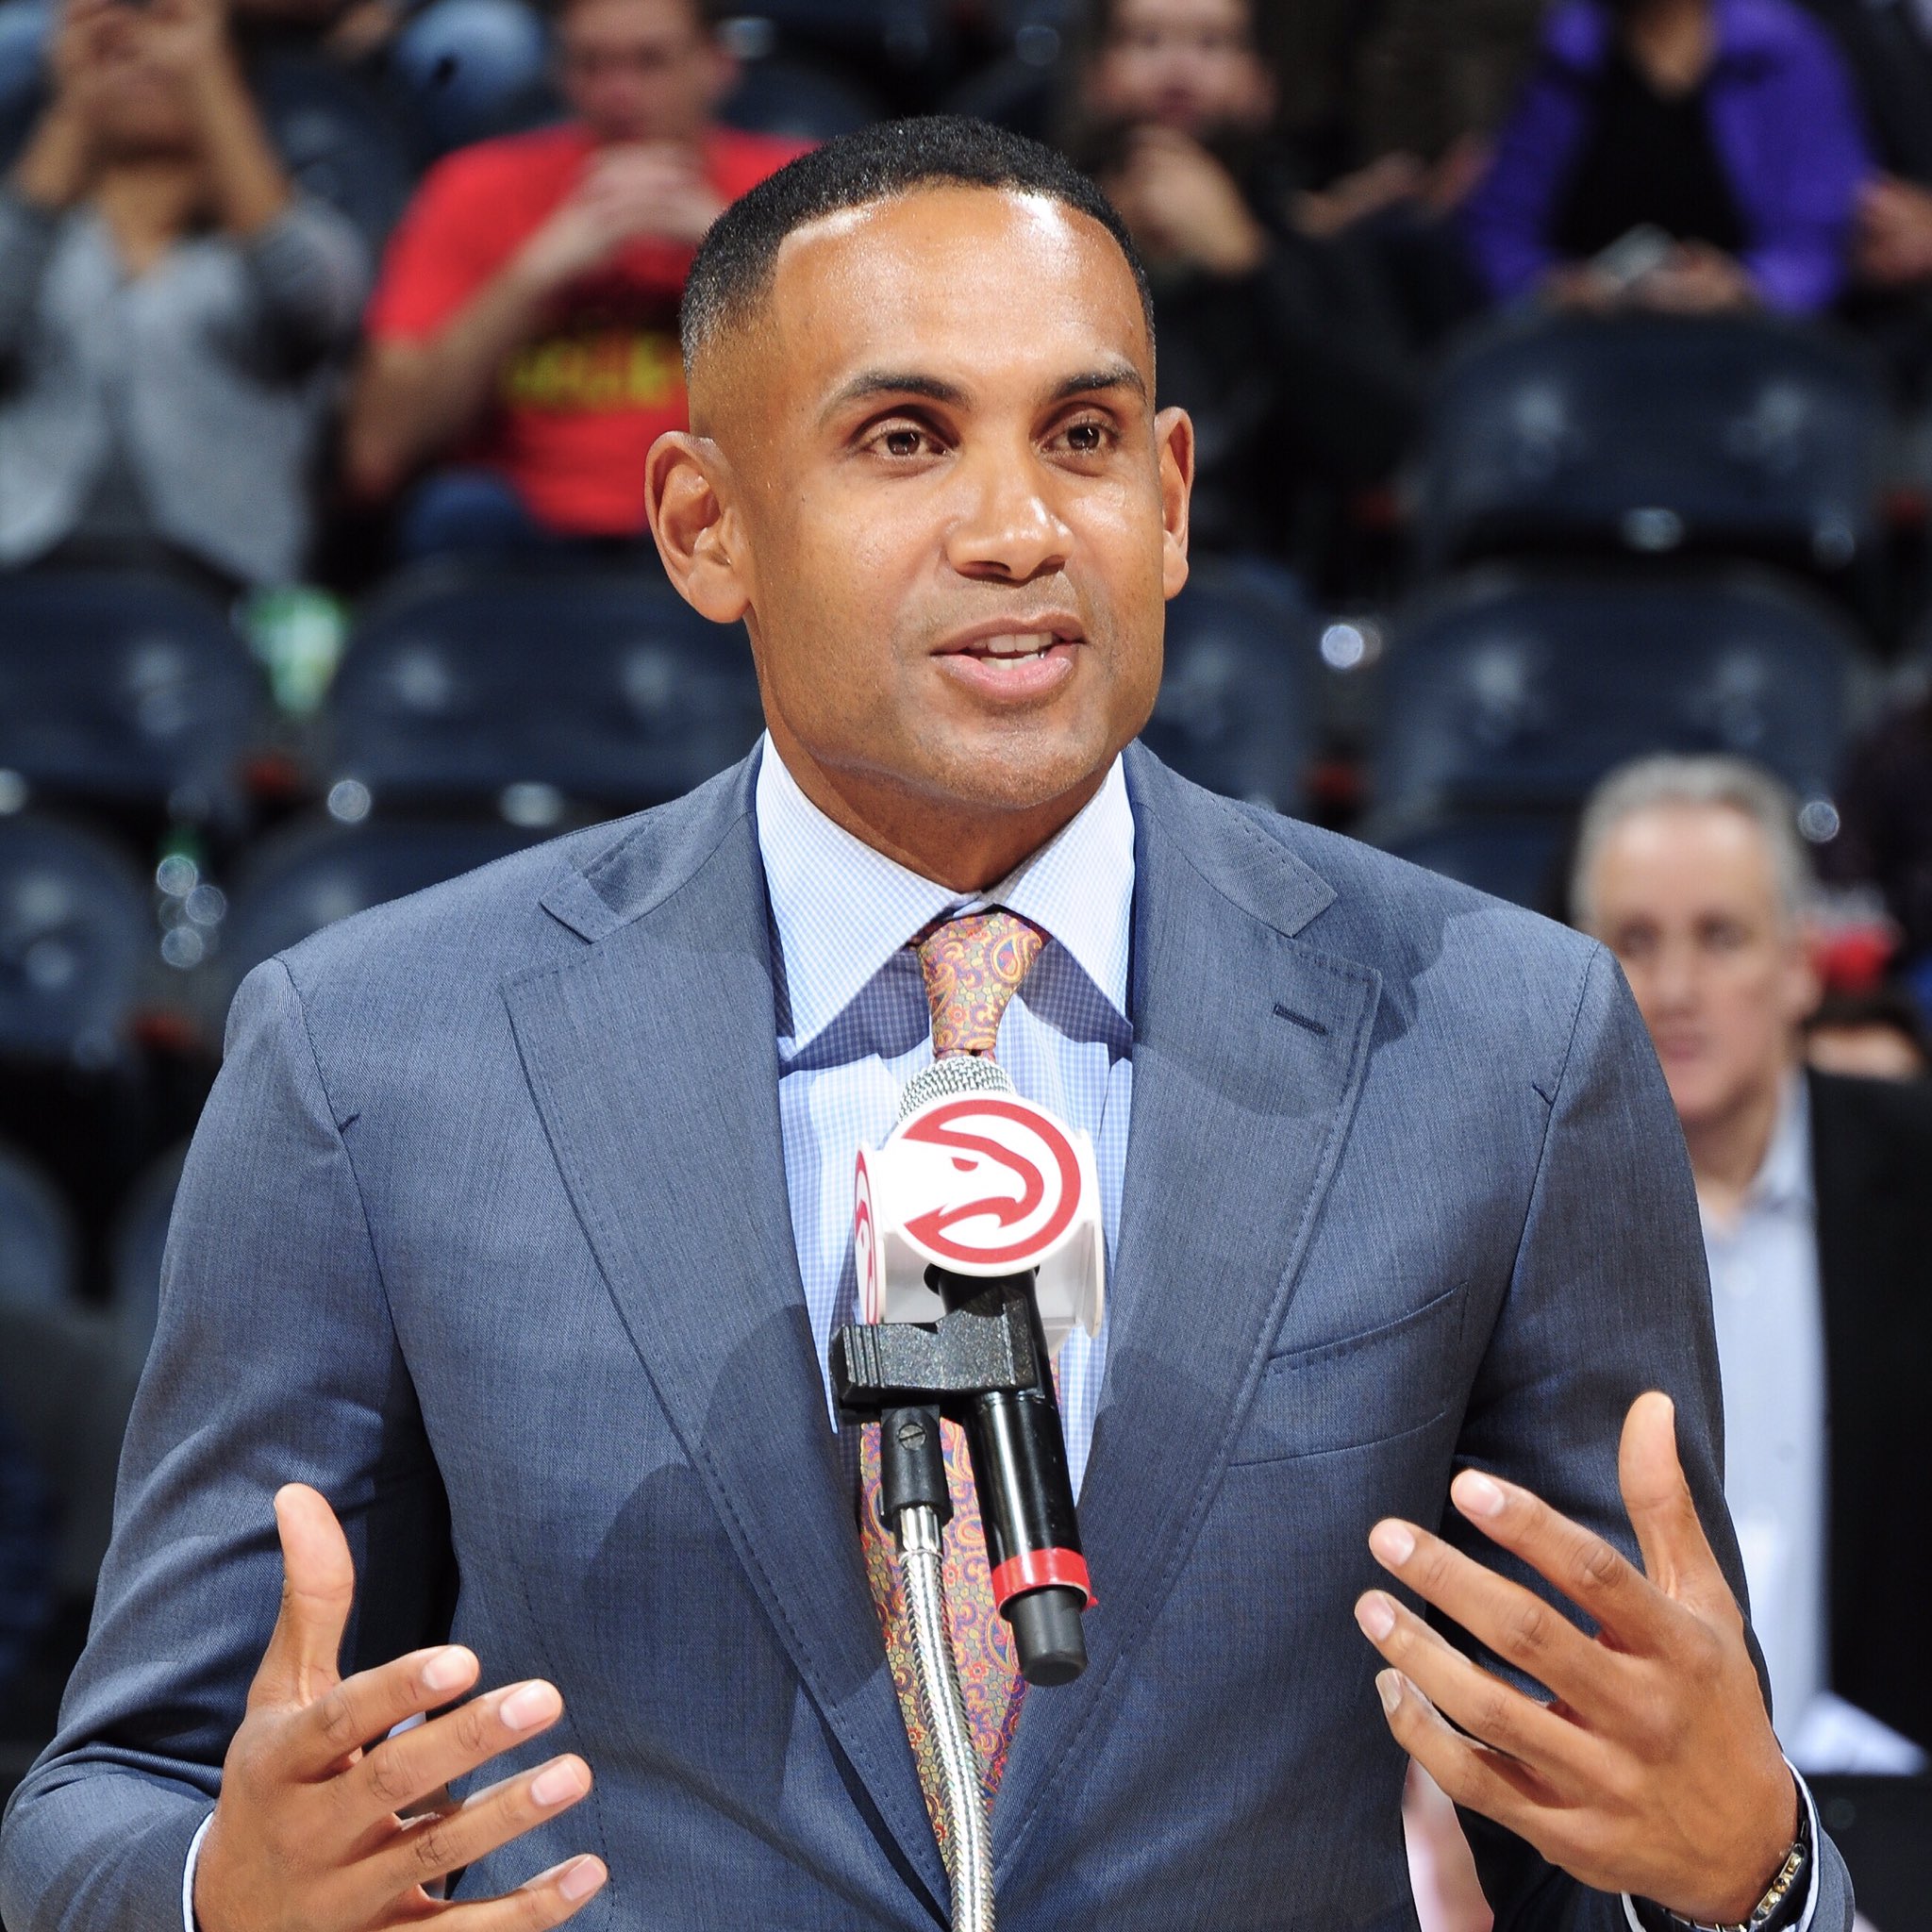 To join us in wishing our Vice Chair of the Board, Grant Hill a very Happy Birthday! 